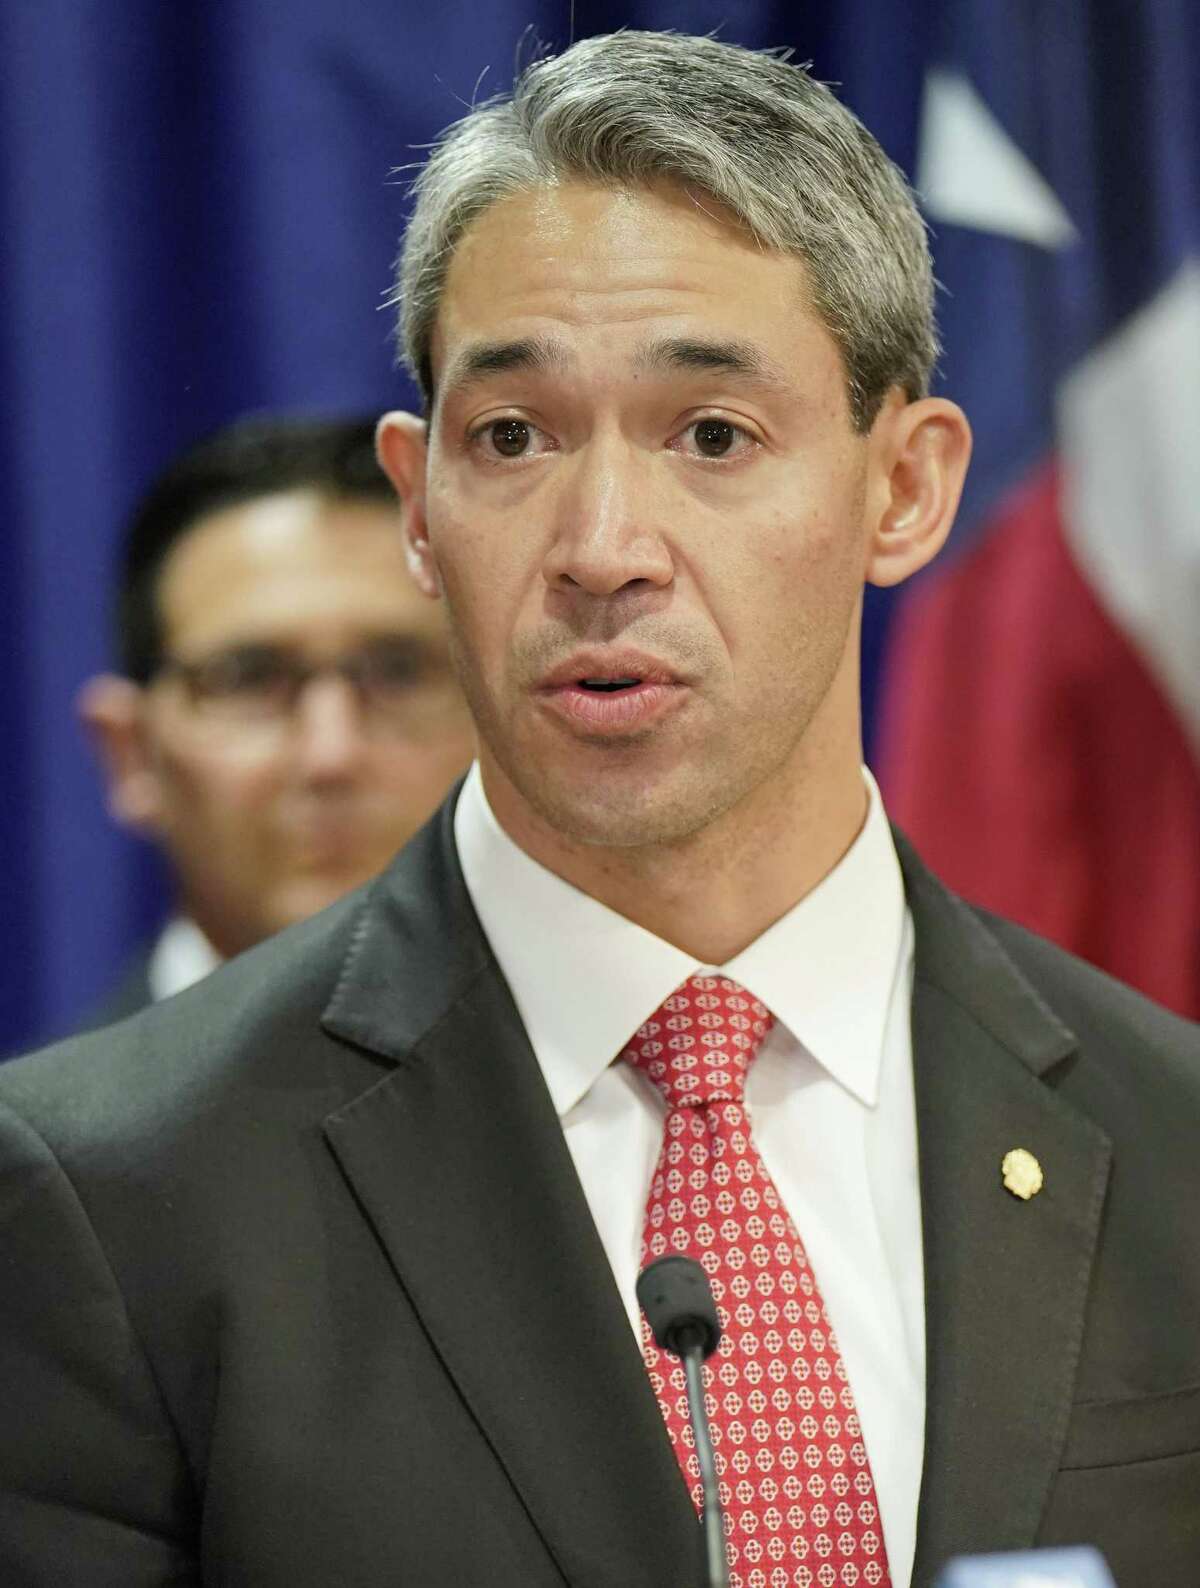 San Antonio Mayor Ron Nirenberg speaks during a press conference regarding preparations for Hurricane Harvey, Thursday, Aug. 24, 2017, at the Emergency Operations Center in San Antonio. (Darren Abate/For the Express-News)